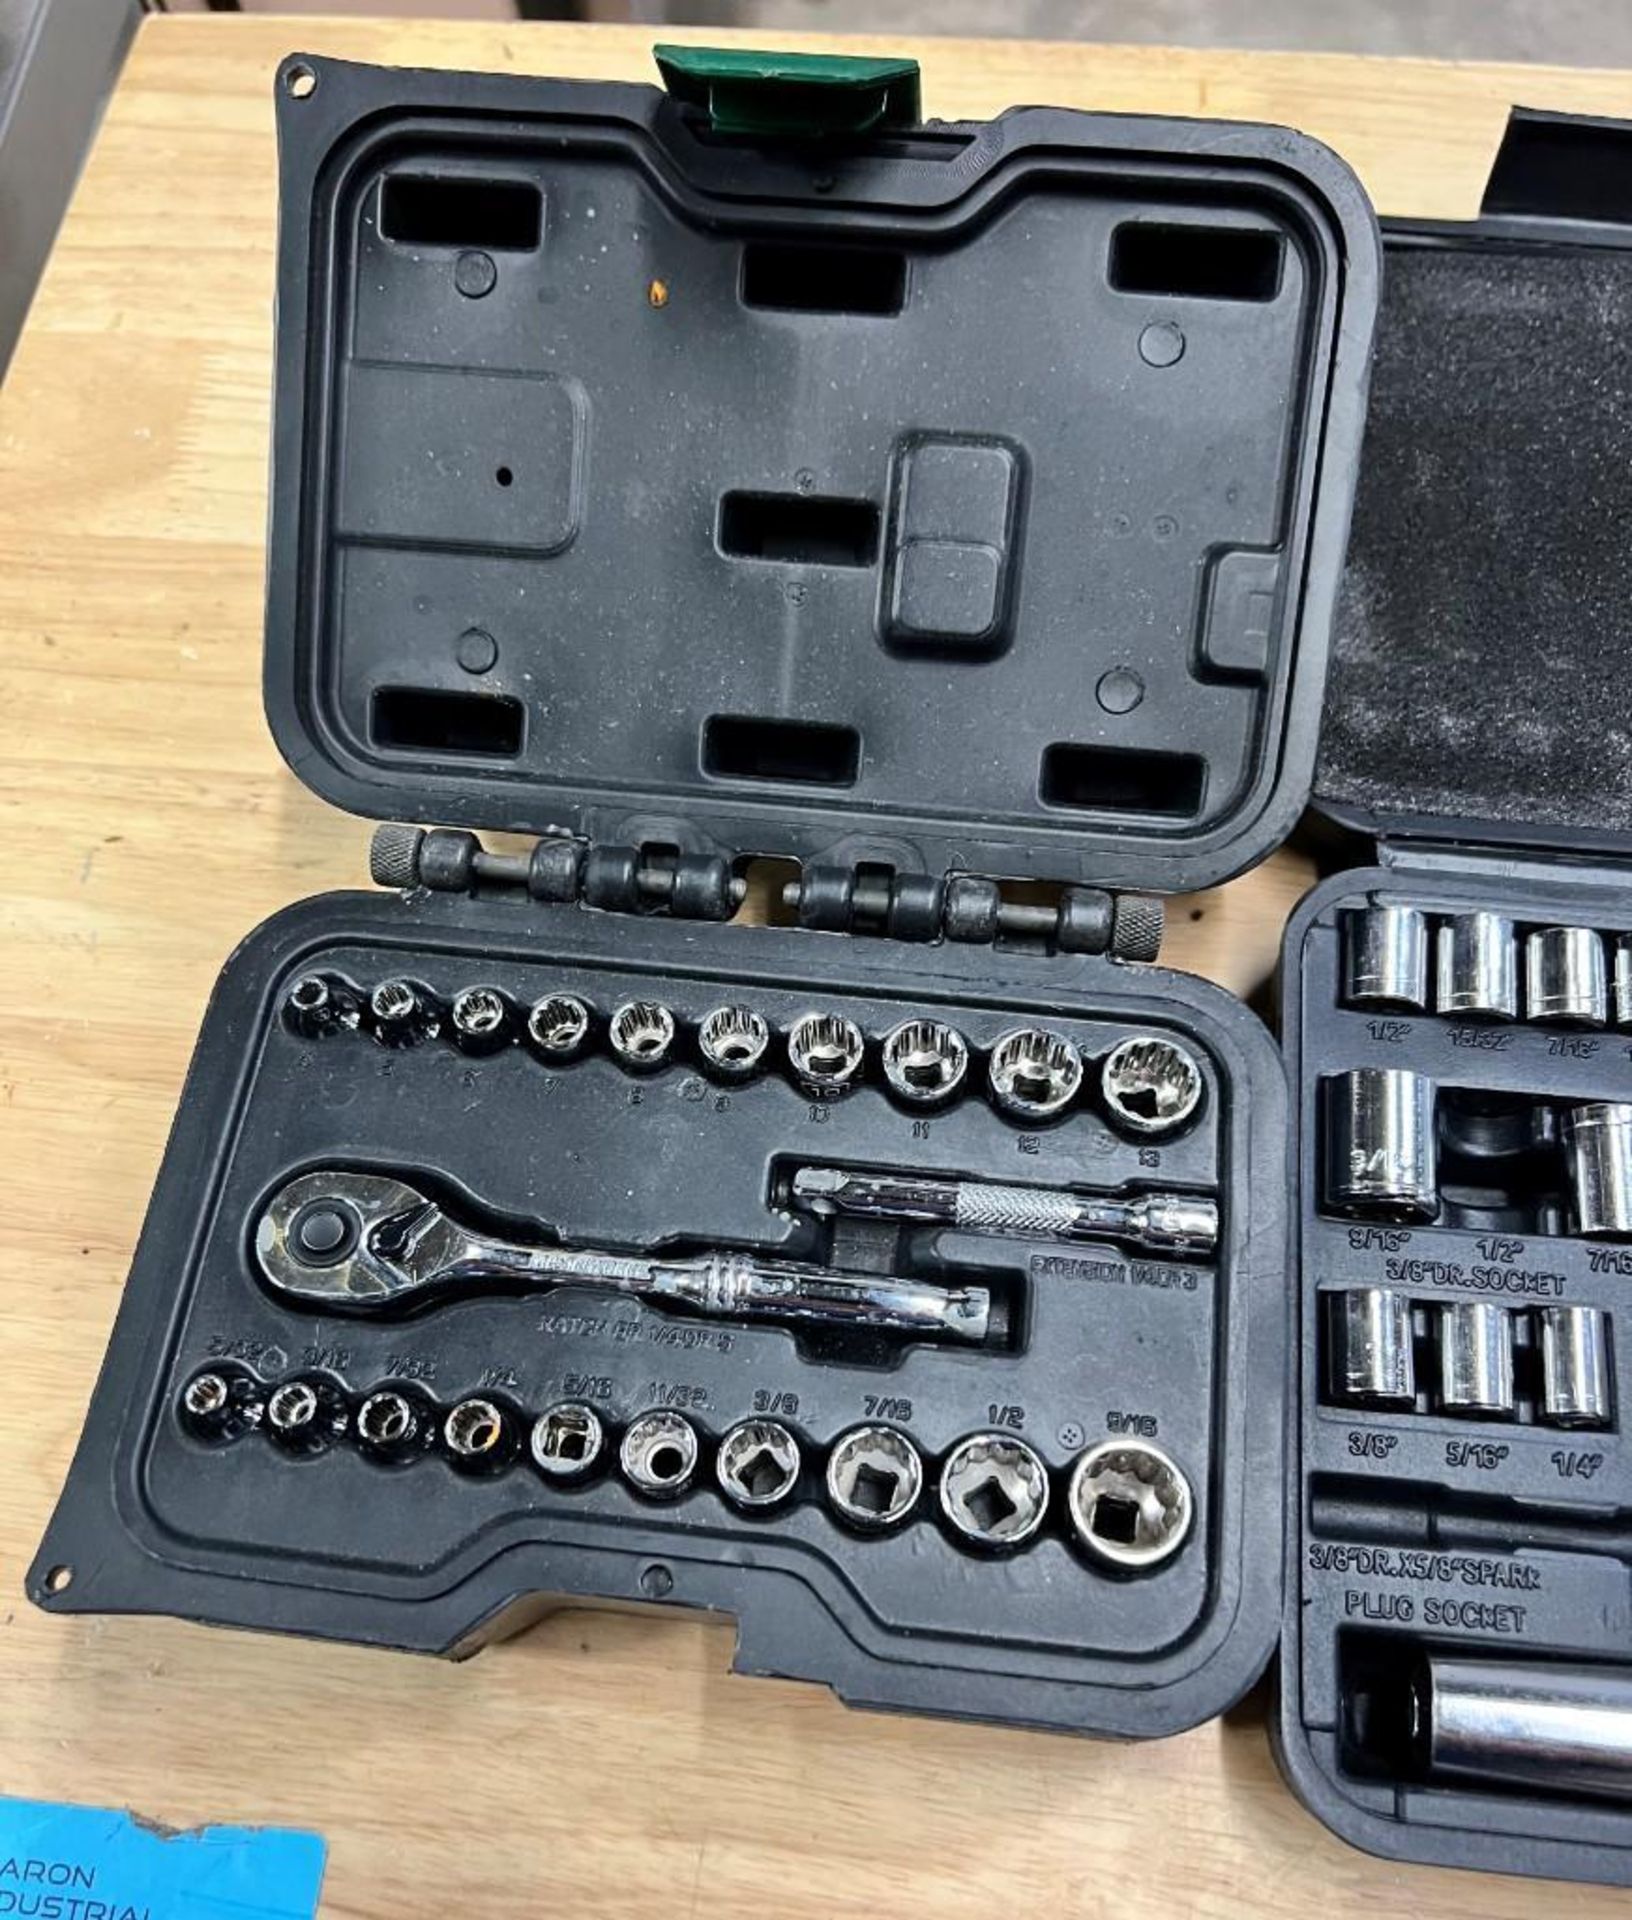 Lot Of Tools Consisting Of: (3) tap & die sets, (2) socket sets, metric wrench set, (2) Performax to - Image 7 of 12